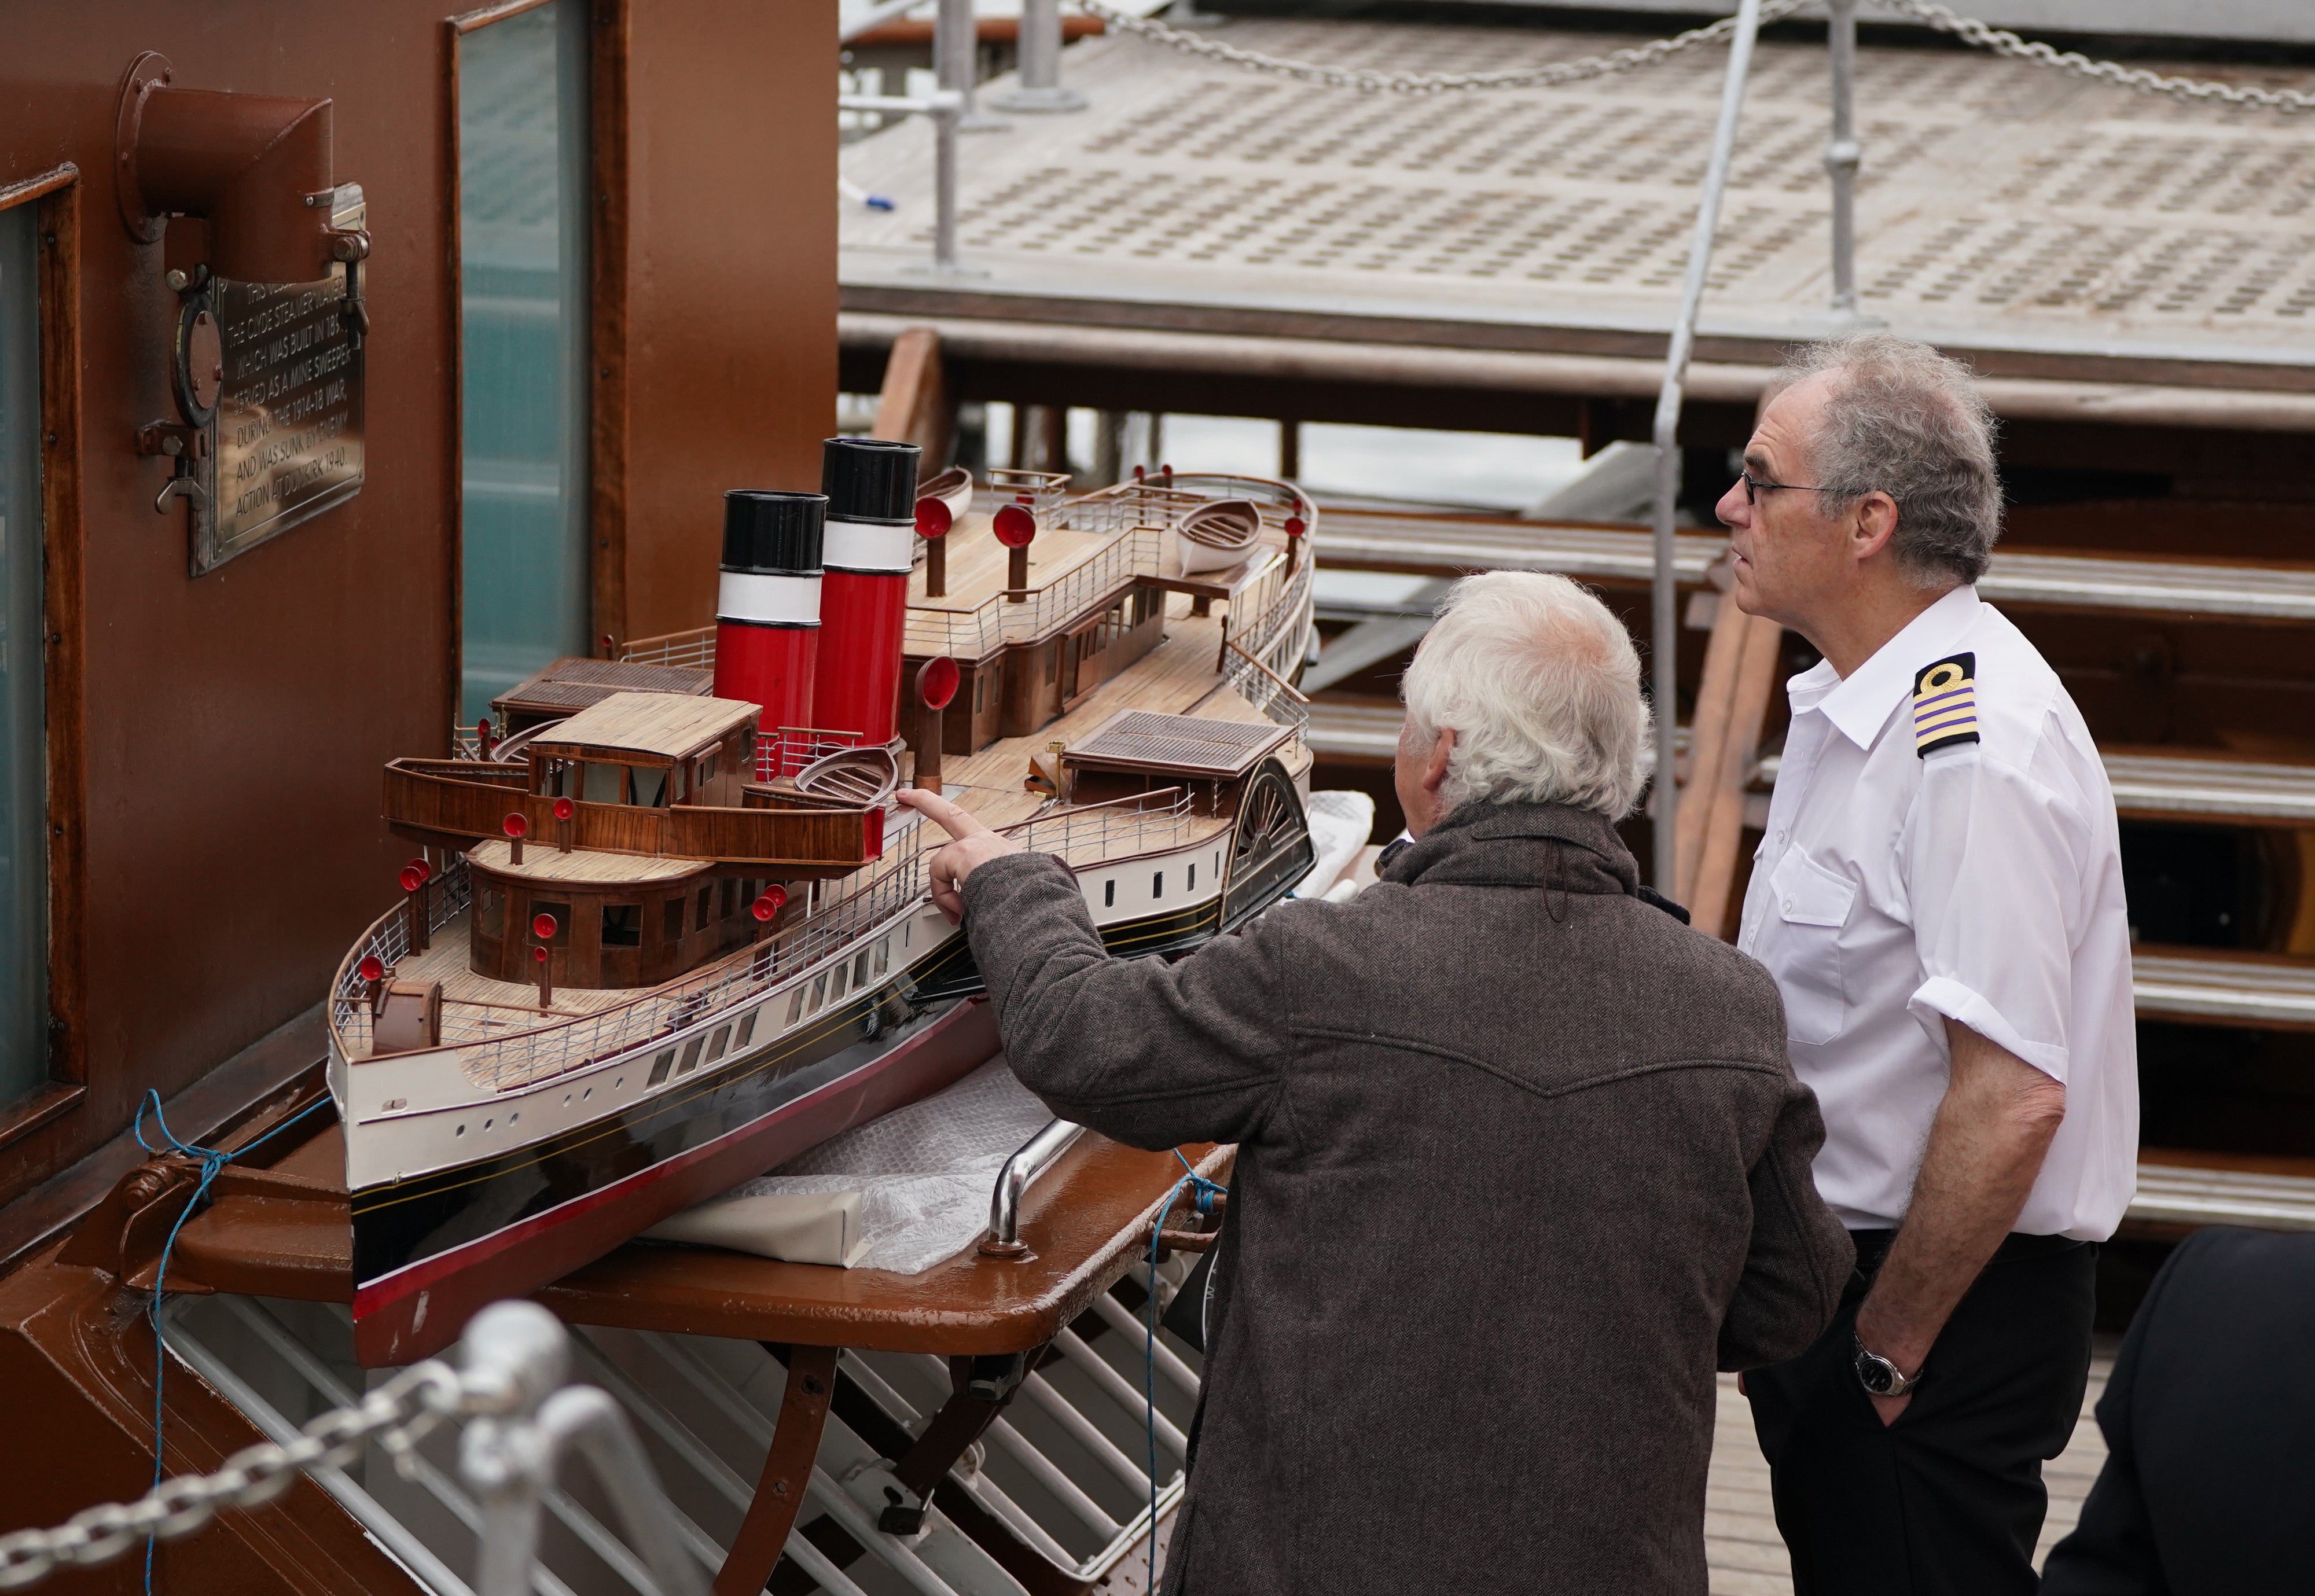 An on-board model of the steamer (Andrew Milligan/PA)